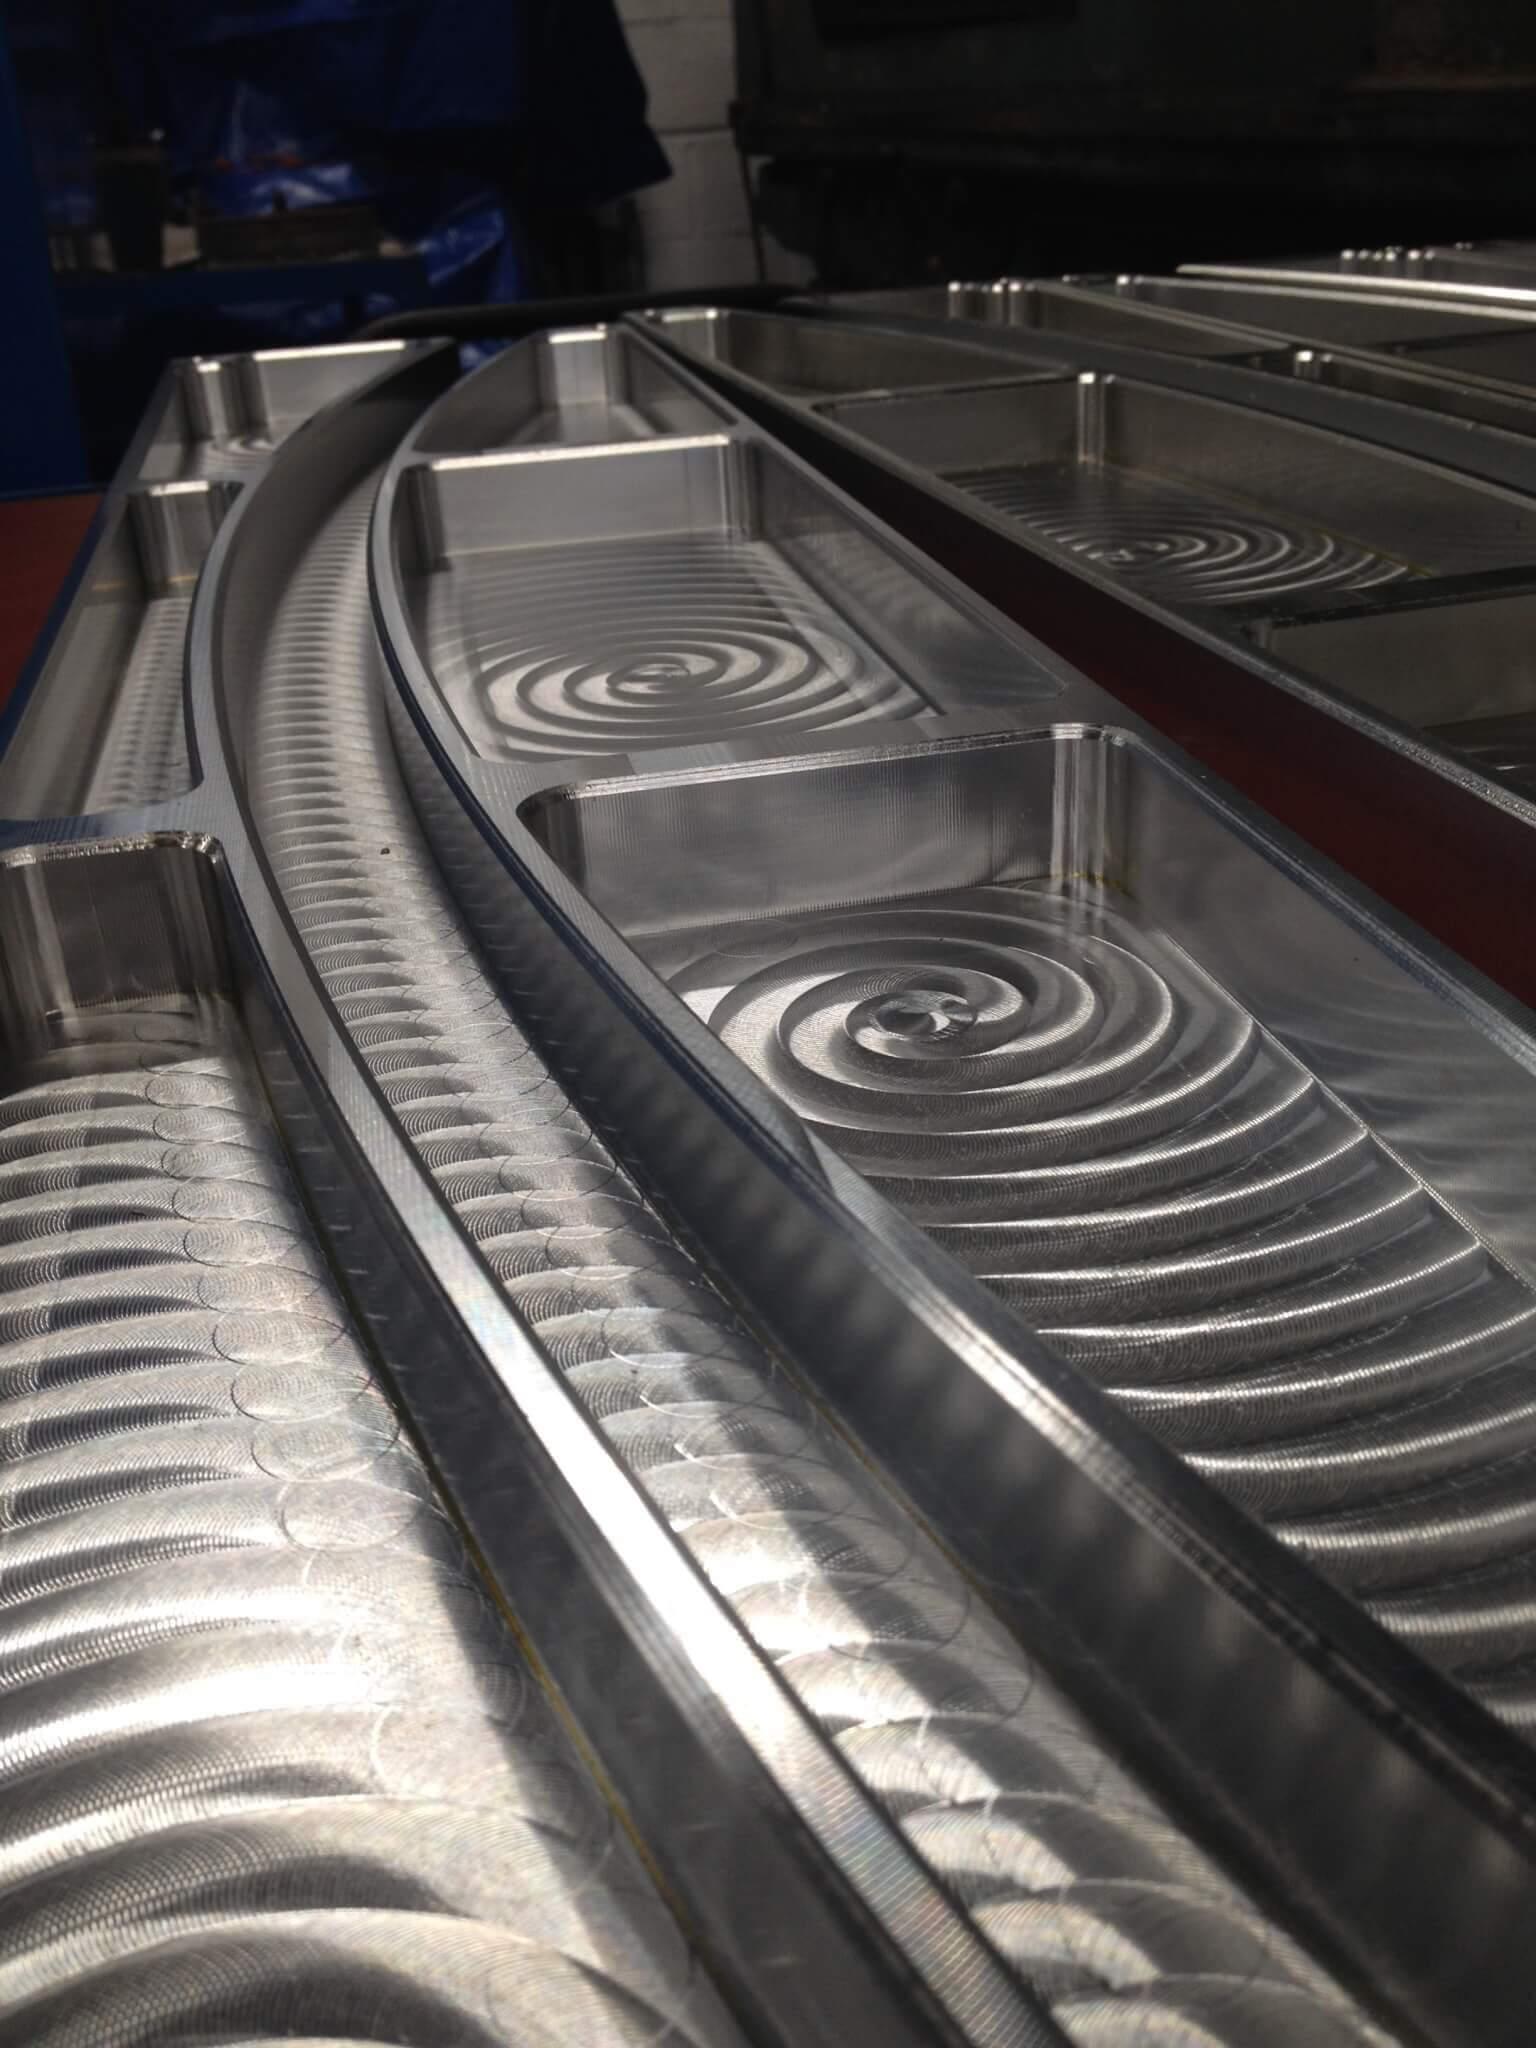 Product CNC Milling Services in Carlisle, Cumbria - Croft Precision Engineering image